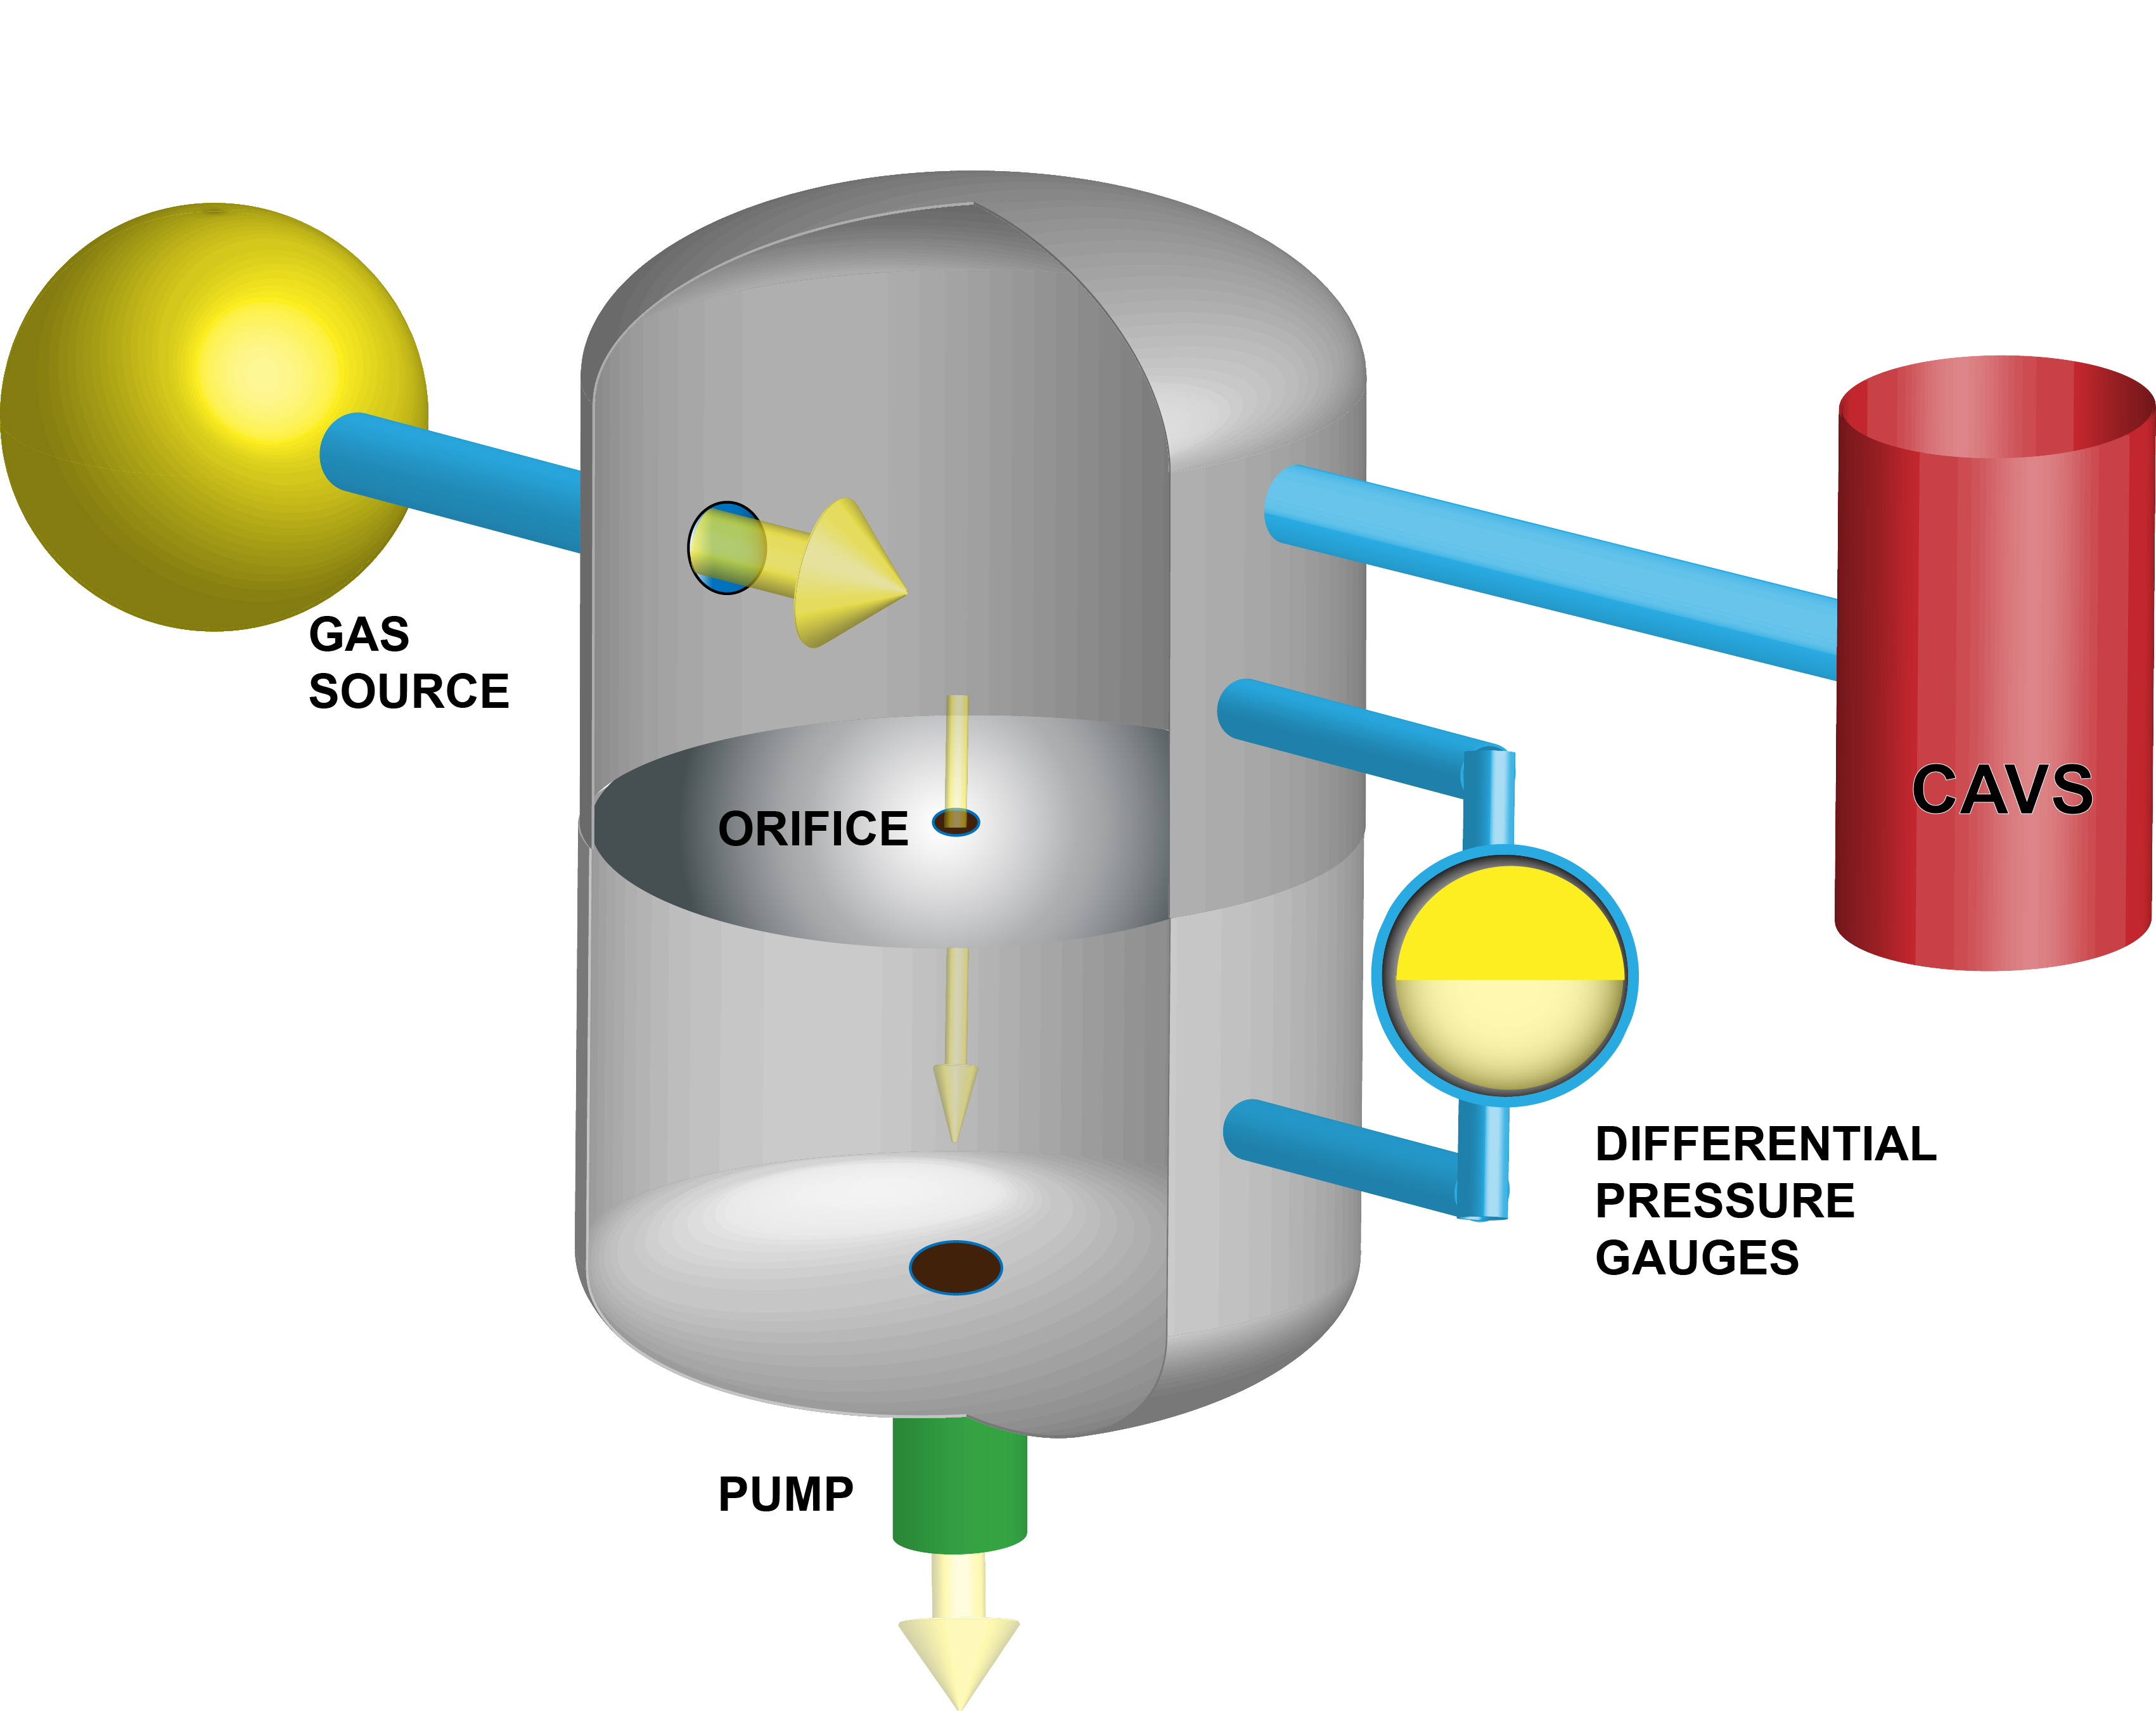 Schematic illustration showing gas being measured in a cylindrical vacuum chamber with smaller red cylinder labeled 